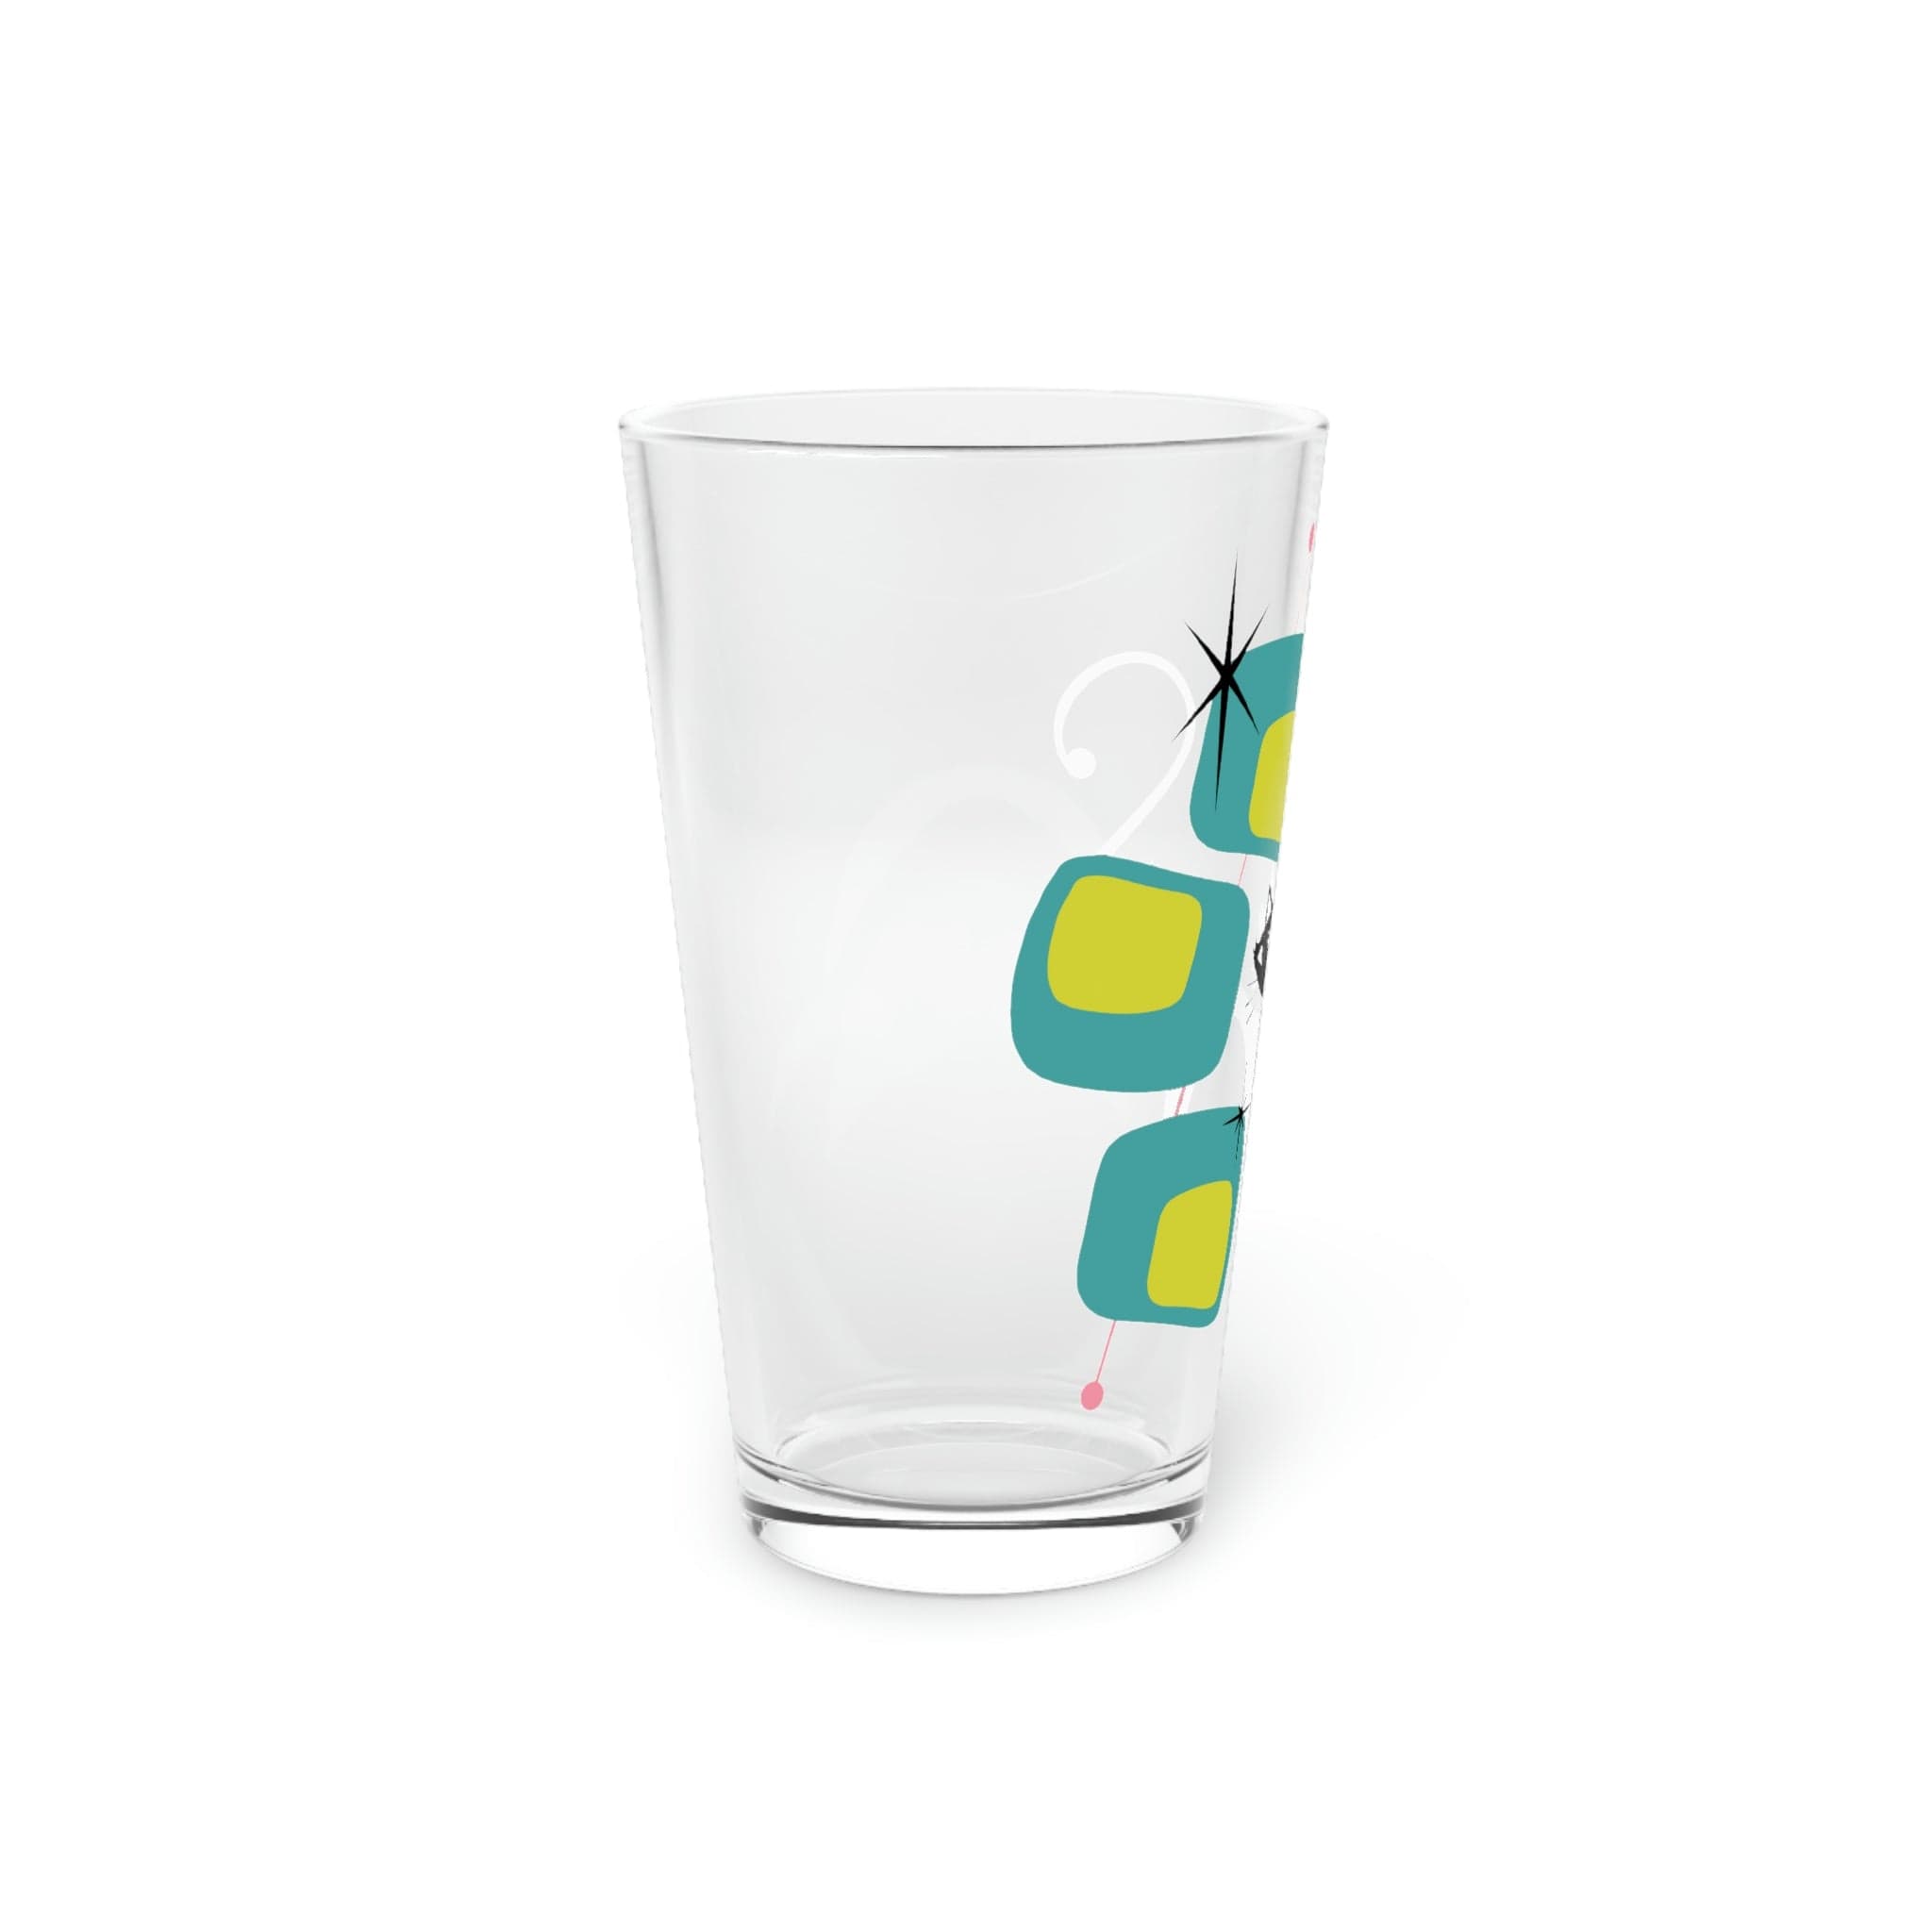 Kate McEnroe New York Atomic Cat Retro Kitsch Pint Glass, 16oz Mid Century Modern Beer Glass, MCM Glass, Beer Glassware Gifts, Party Drinkware, Cocktail Glass Beer Glasses 16oz 21482491883001381578